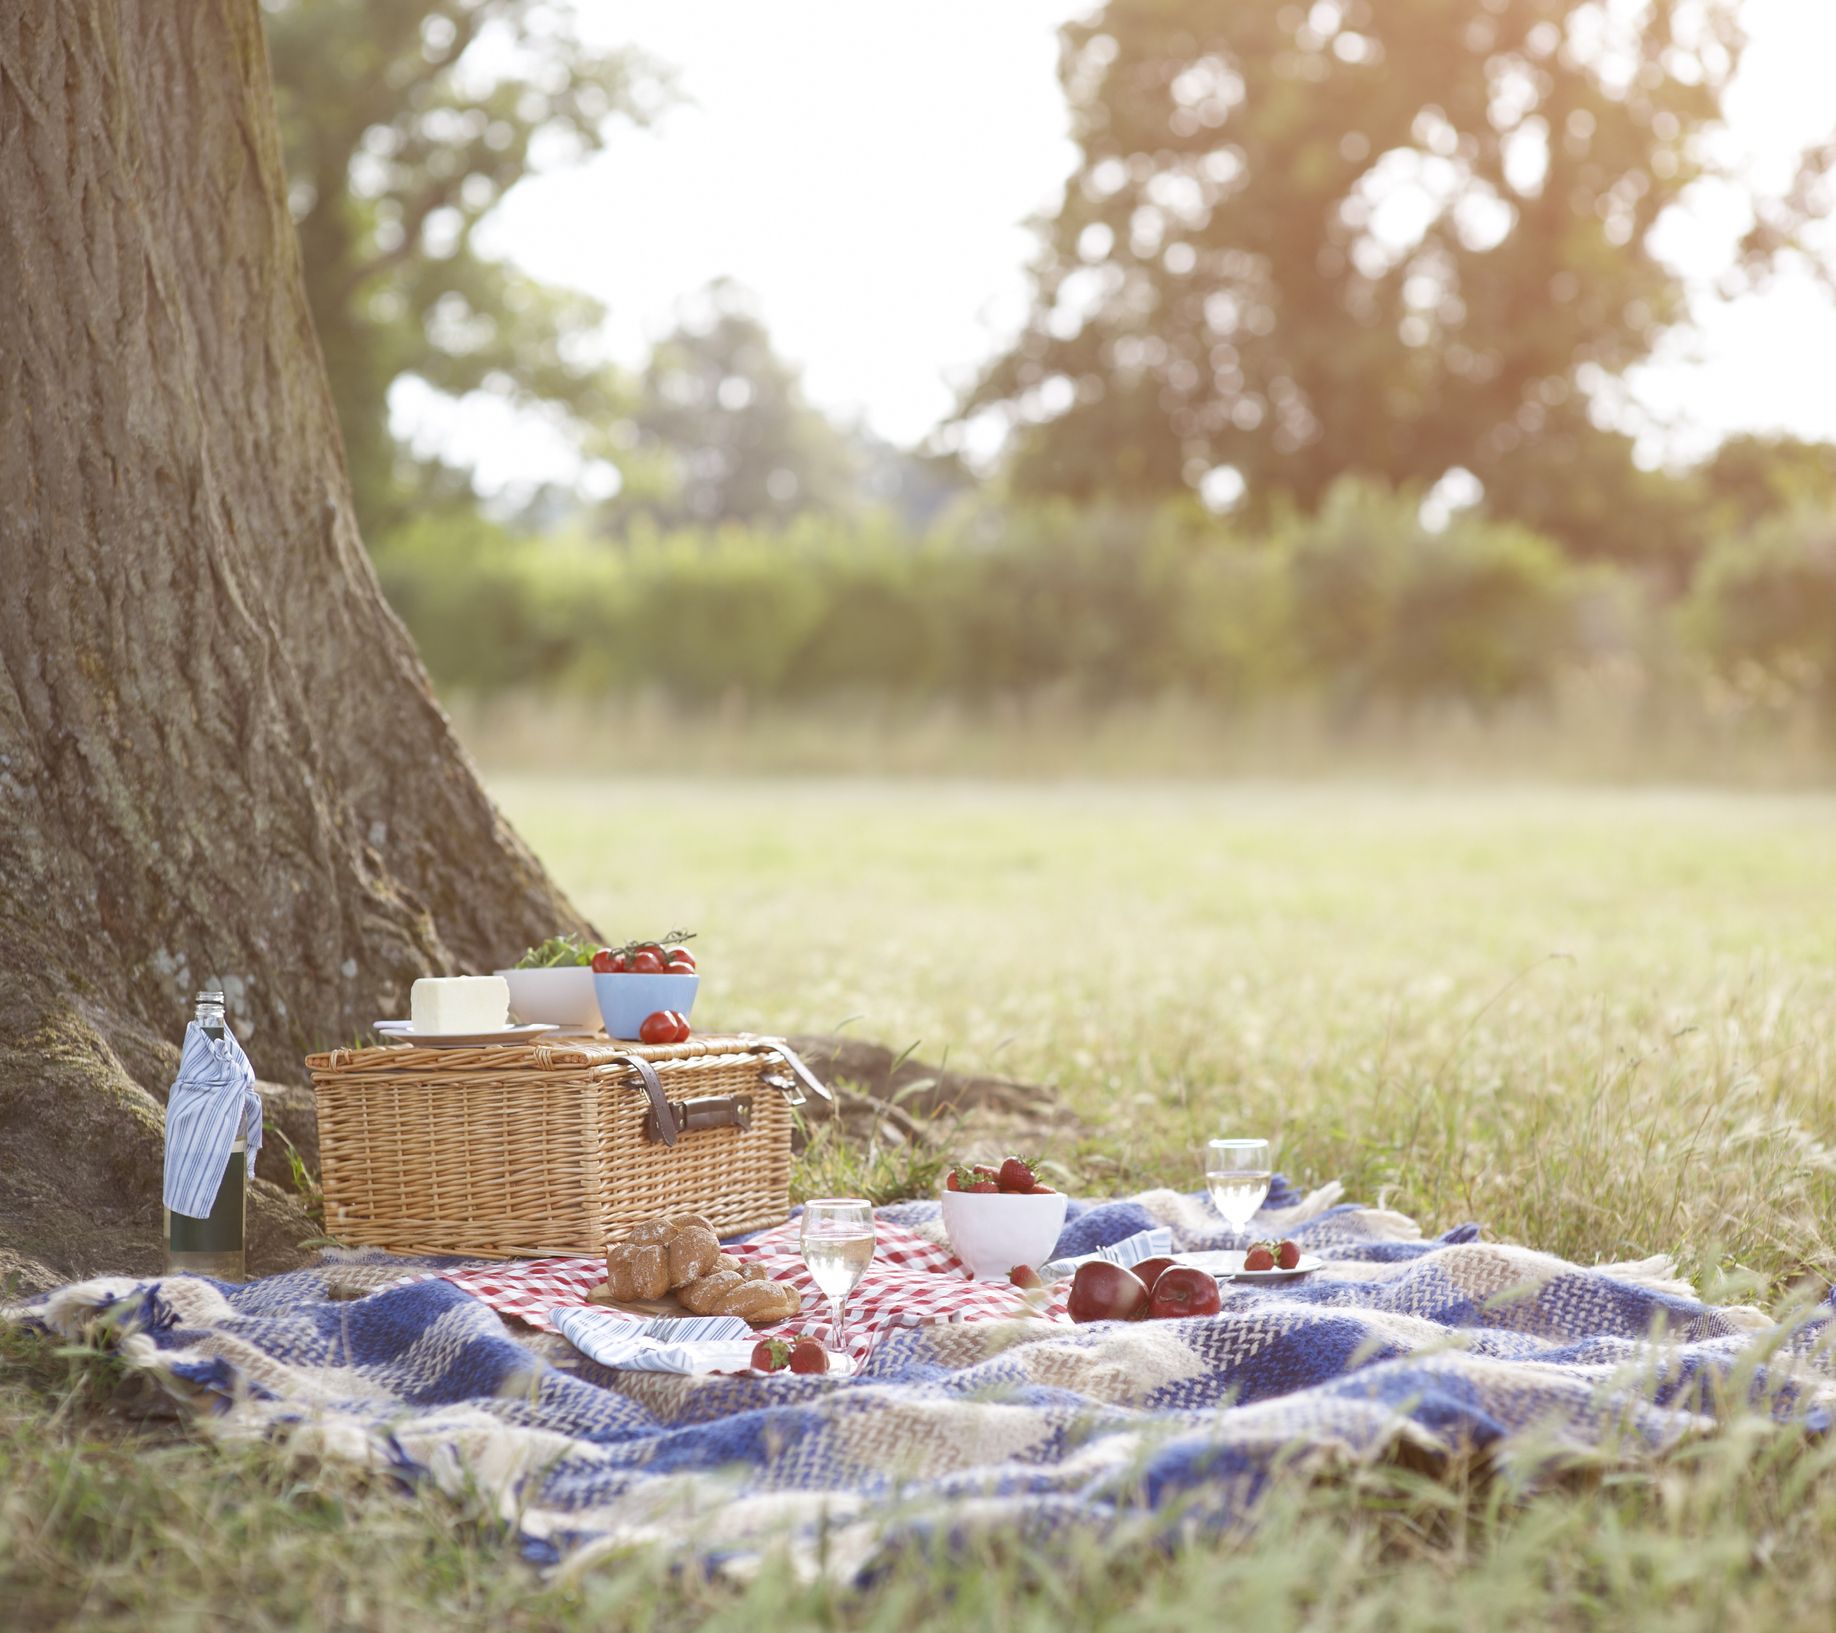 The Best Picnic Baskets For Your Next Fall Outing